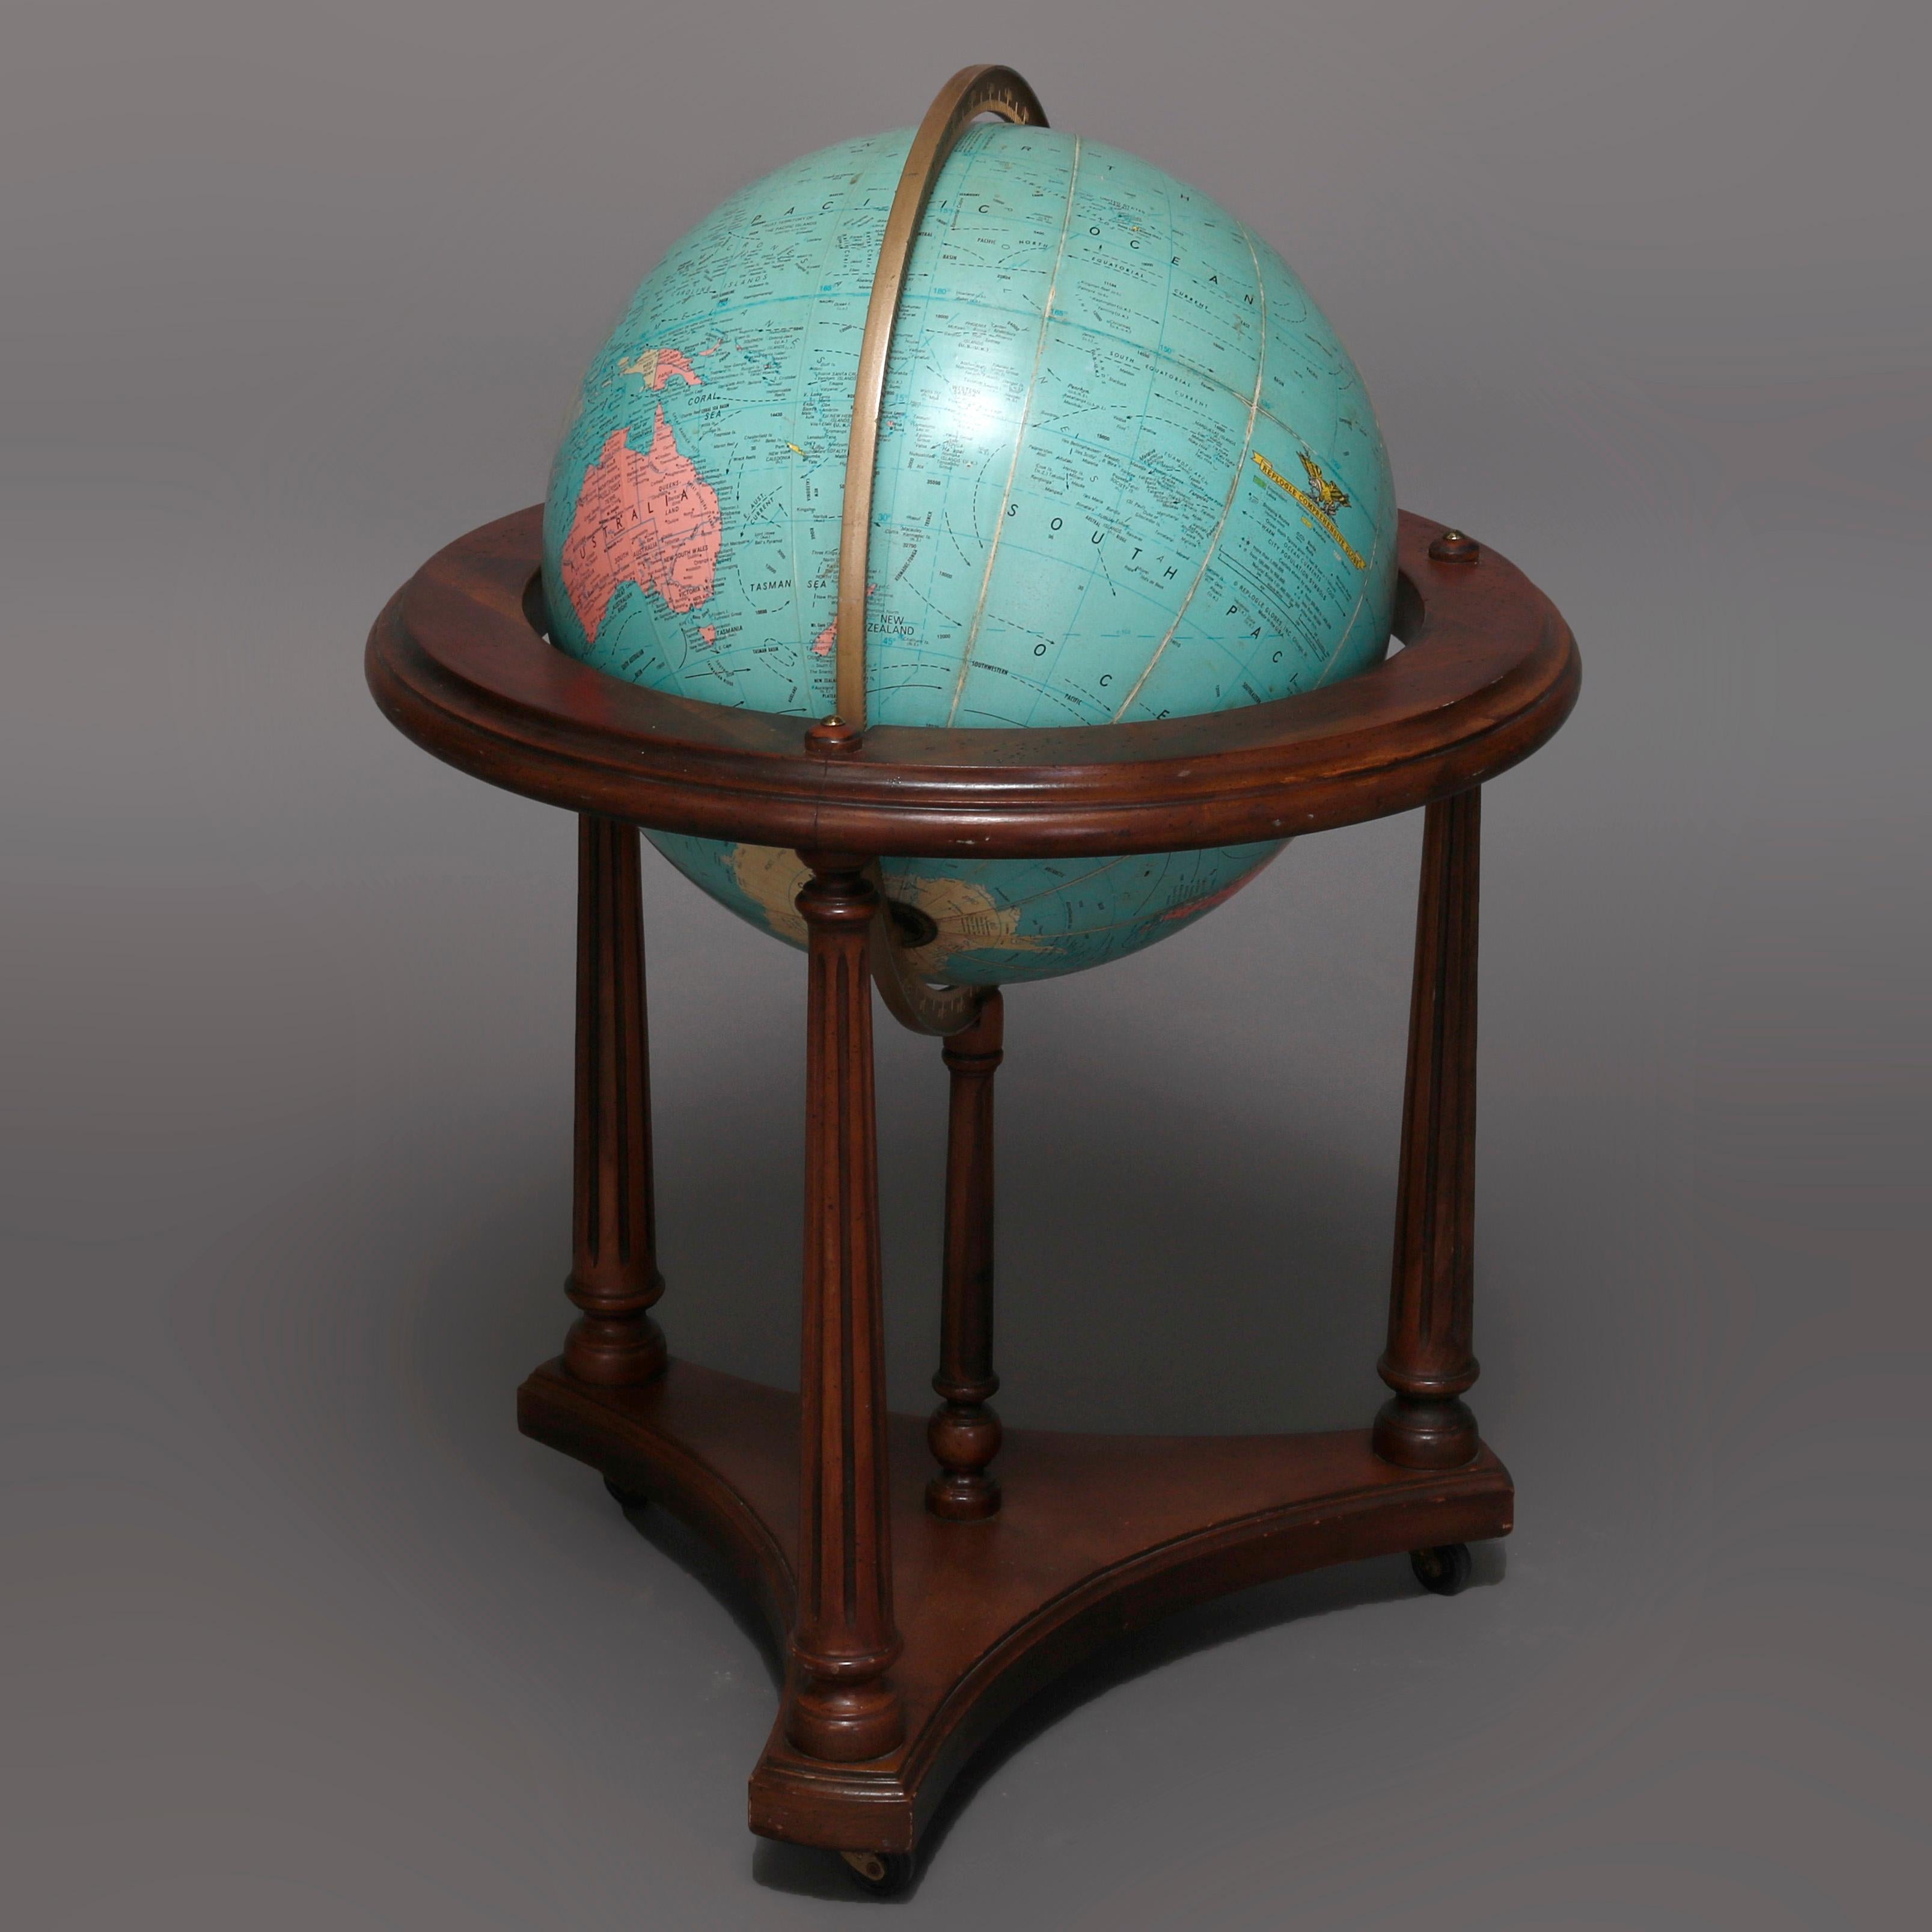 A vintage comprehensive world globe seated and swivels within Stand having mahogany construction with three turned and reeded legs by Replogle Globes Inc., office model, 20th century.

Measures: 32